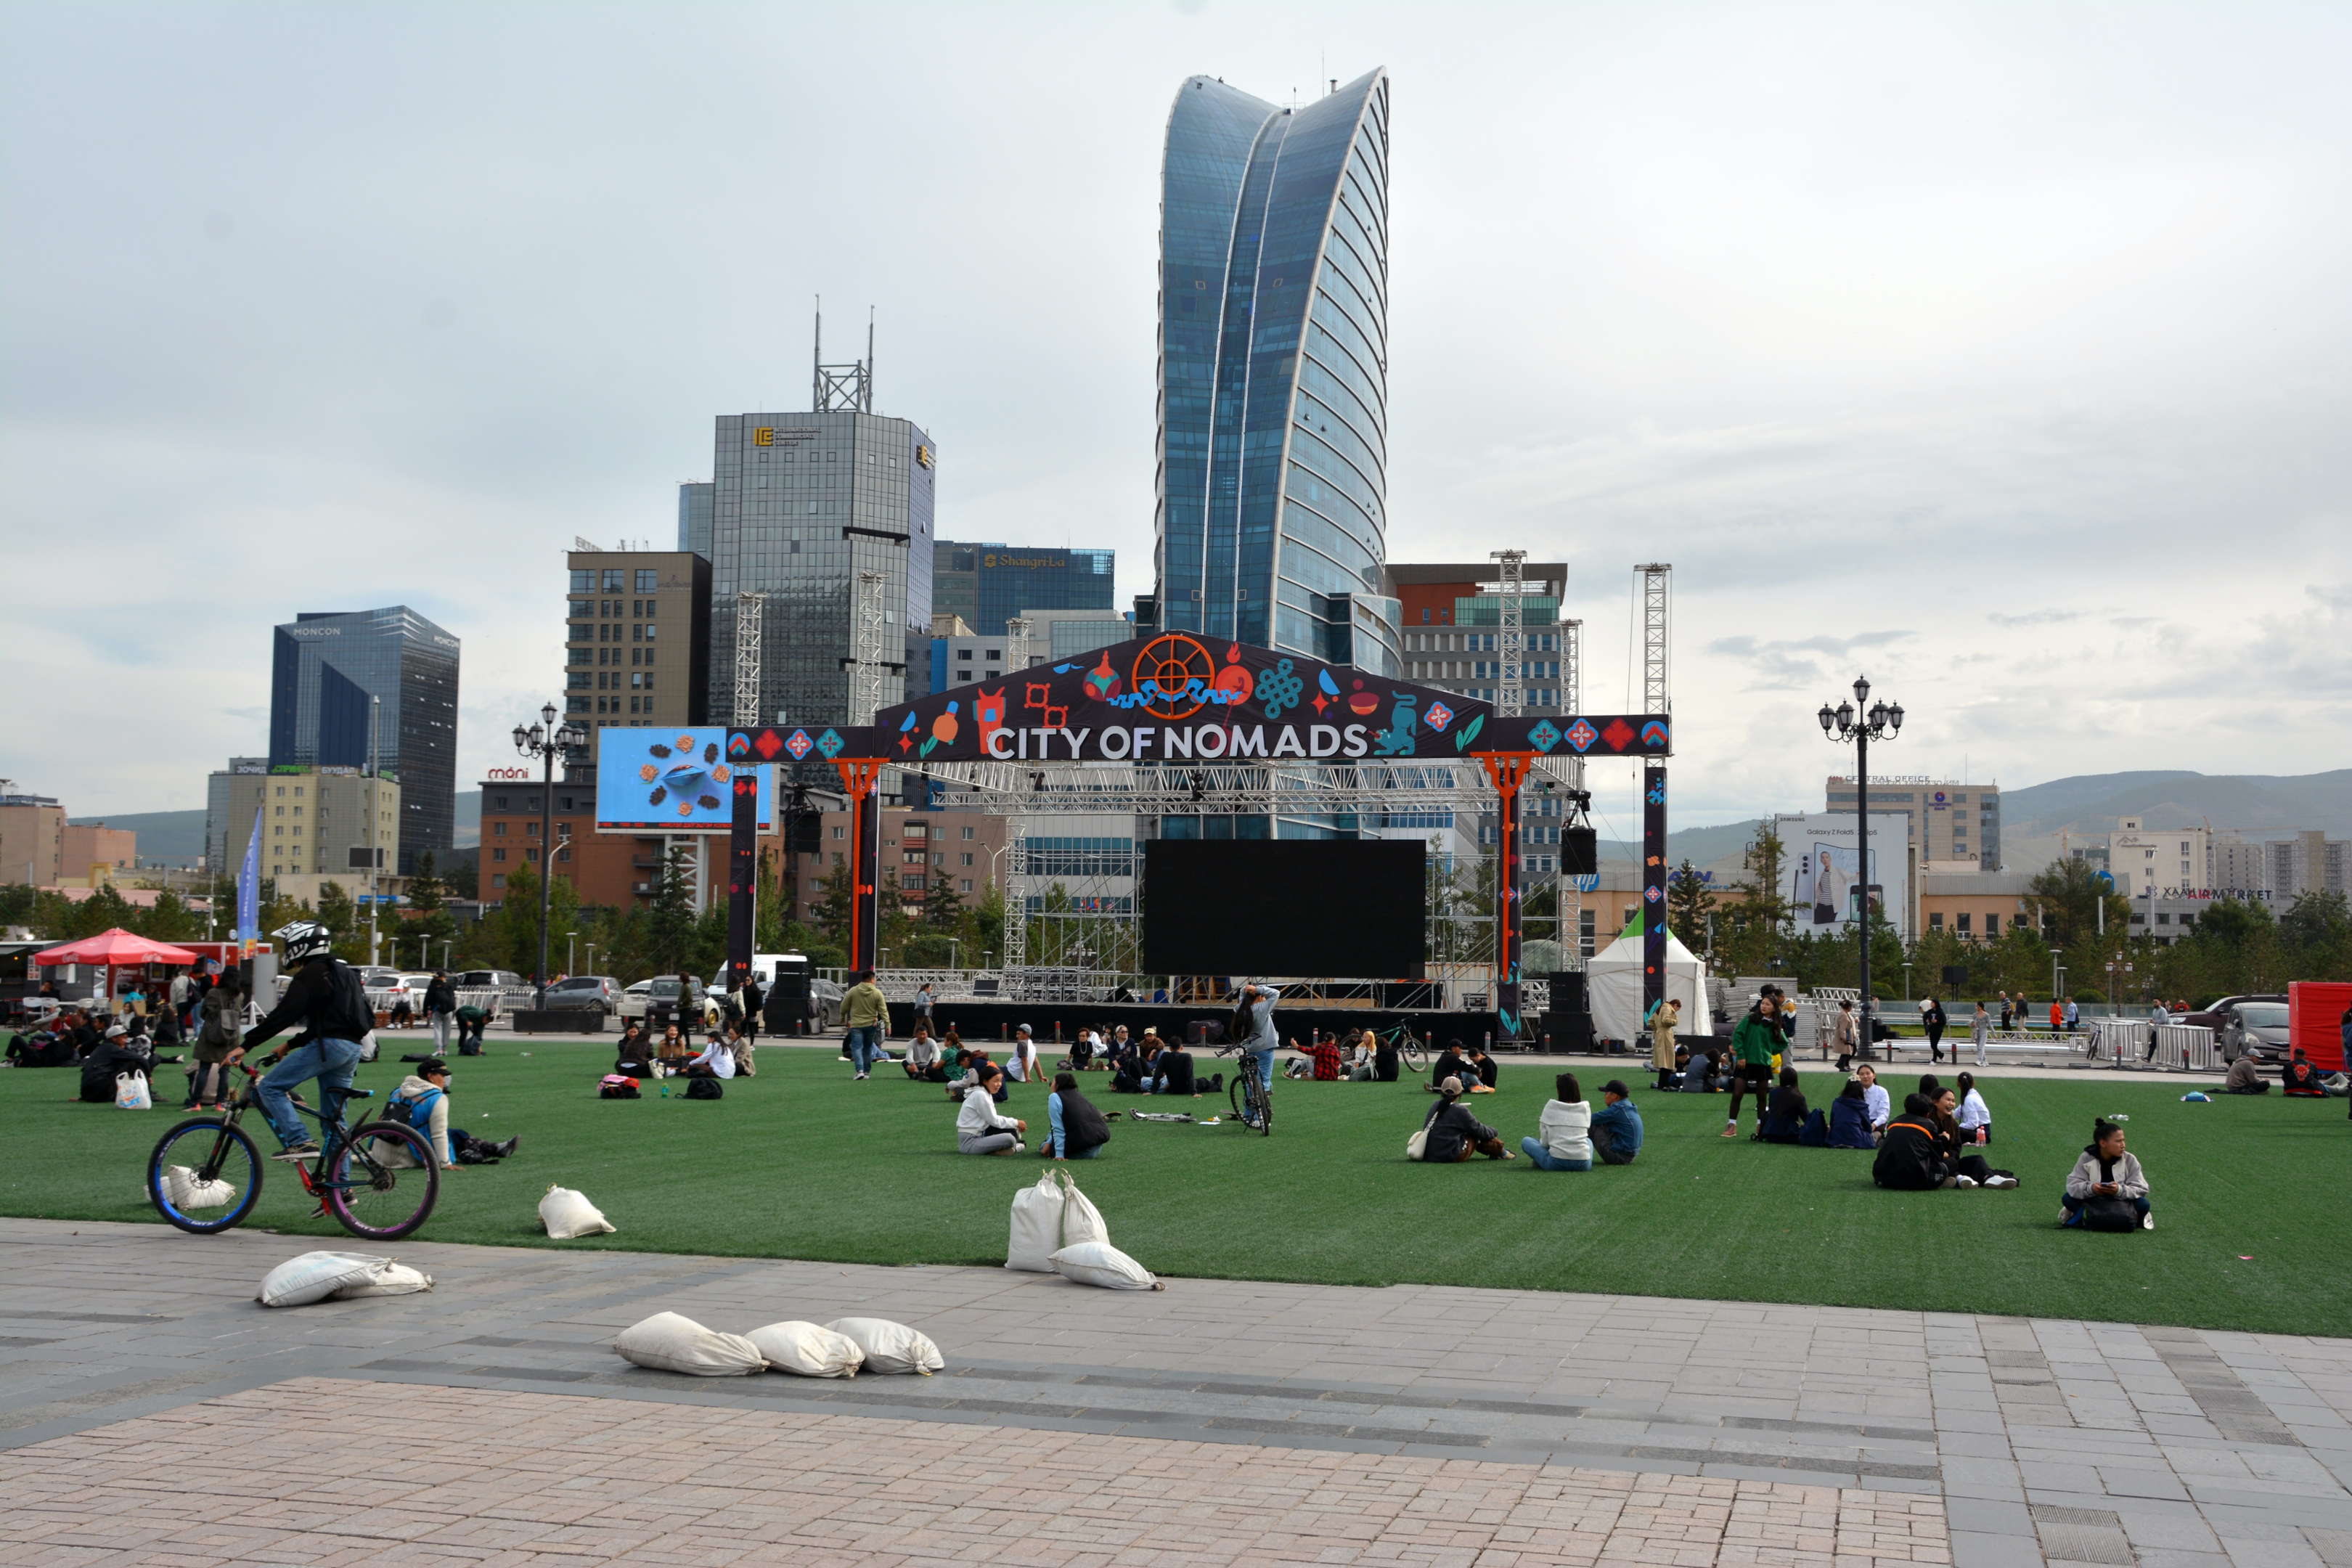 Ulaanbaatar's youth culture hotspots with high rise buildings characterizing the city center